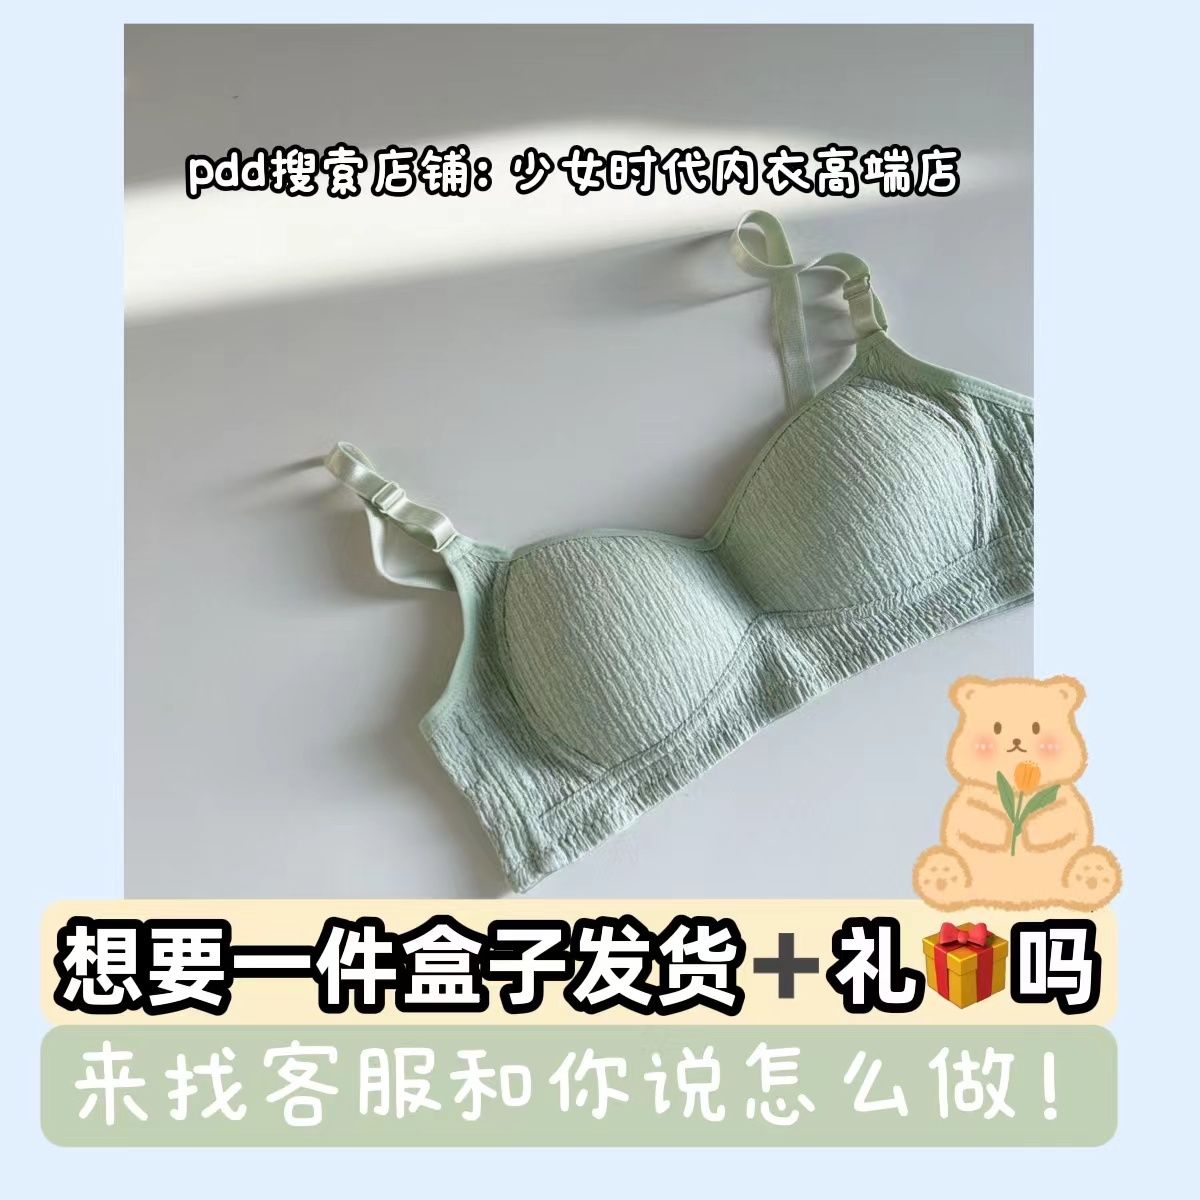 Cream puffs ~ pure desire wind thin section small chest special underwear women's bra without steel ring gather girl bra